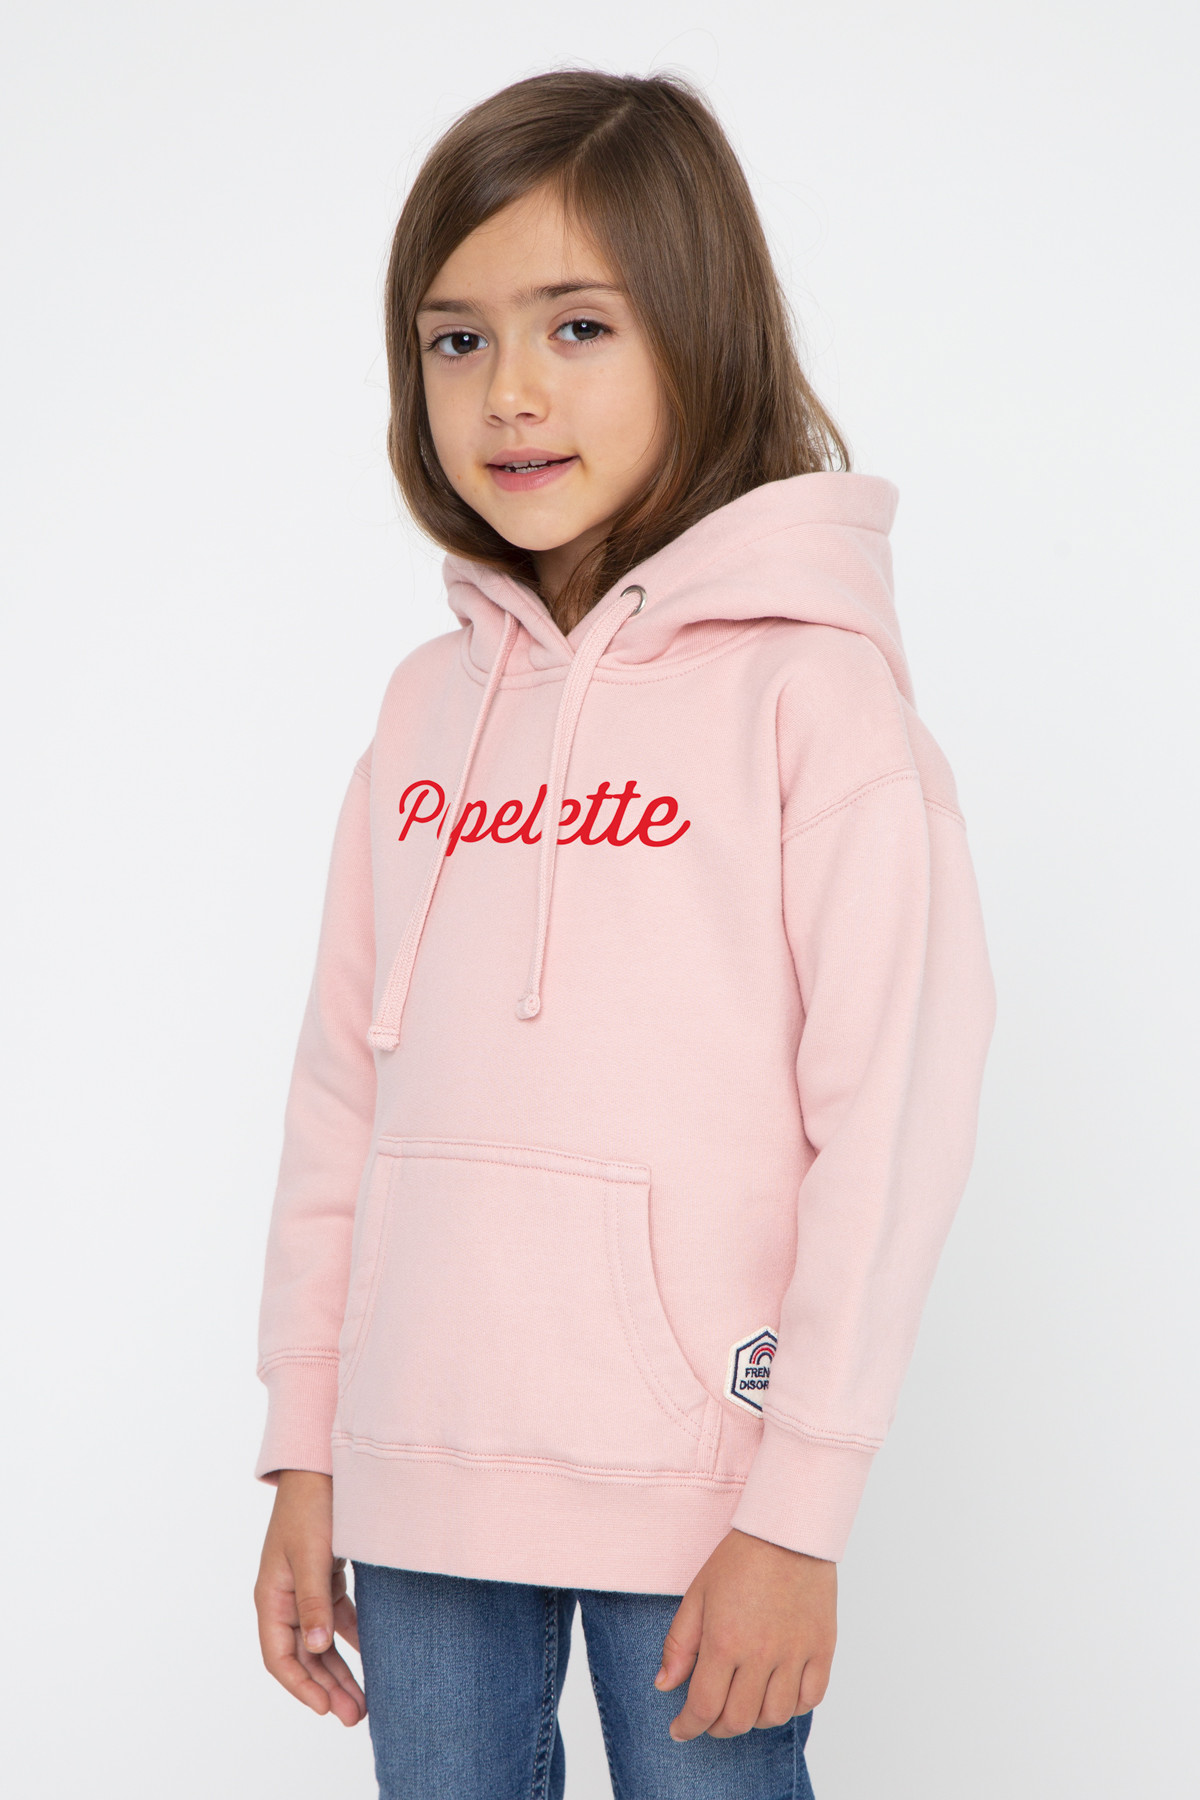 Photo de STOP Hoodie Kids PIPELETTE chez French Disorder